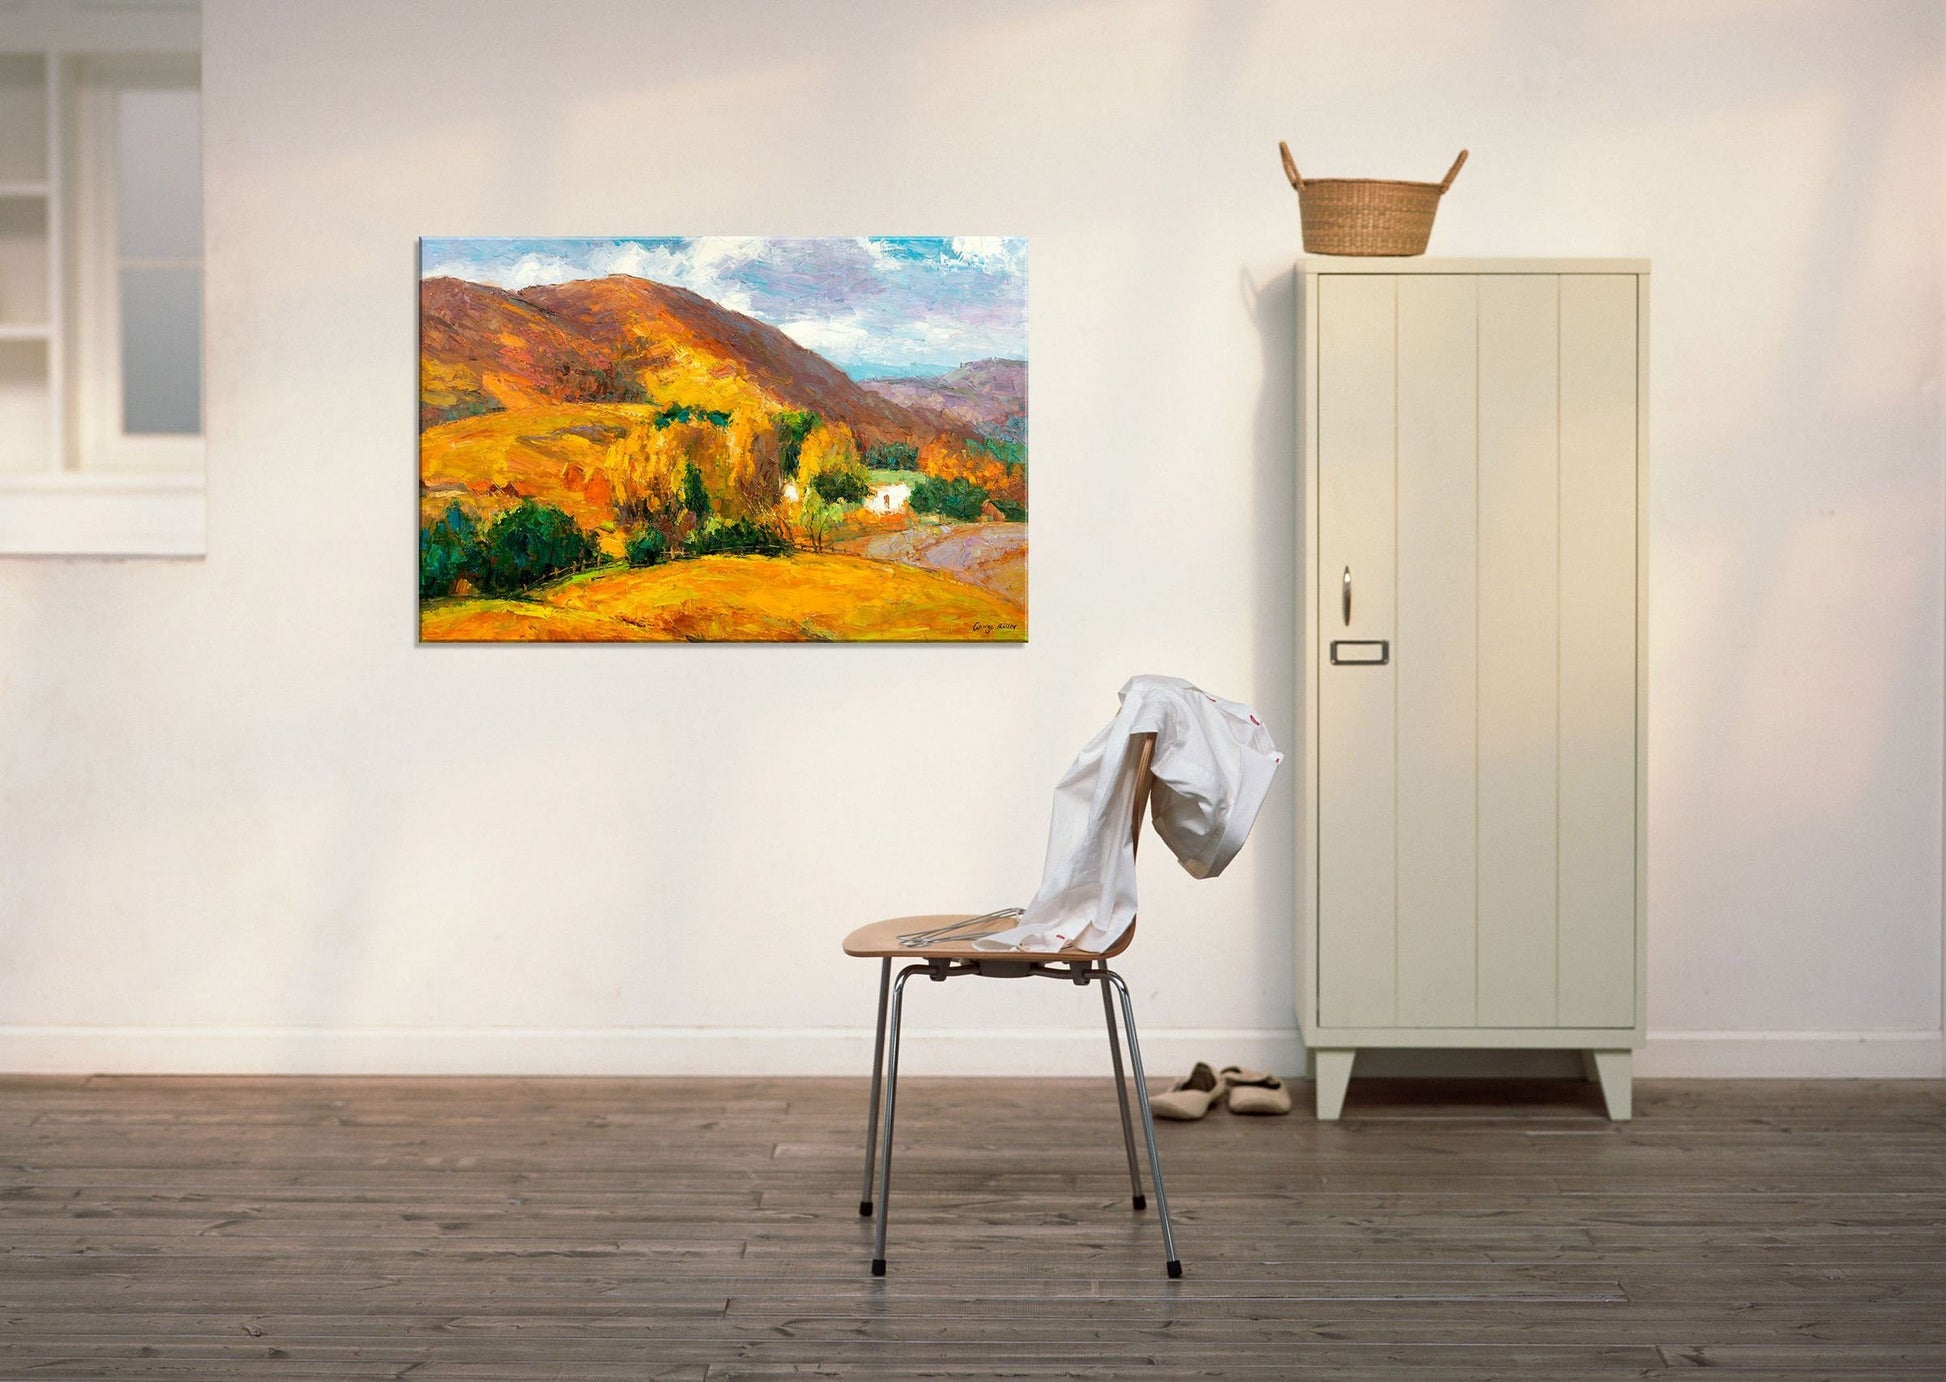 The Perfect Rustic Wall Art - This Impasto Painting of Large Landscape Hills by George Miller is Ideal for Any Home or Office